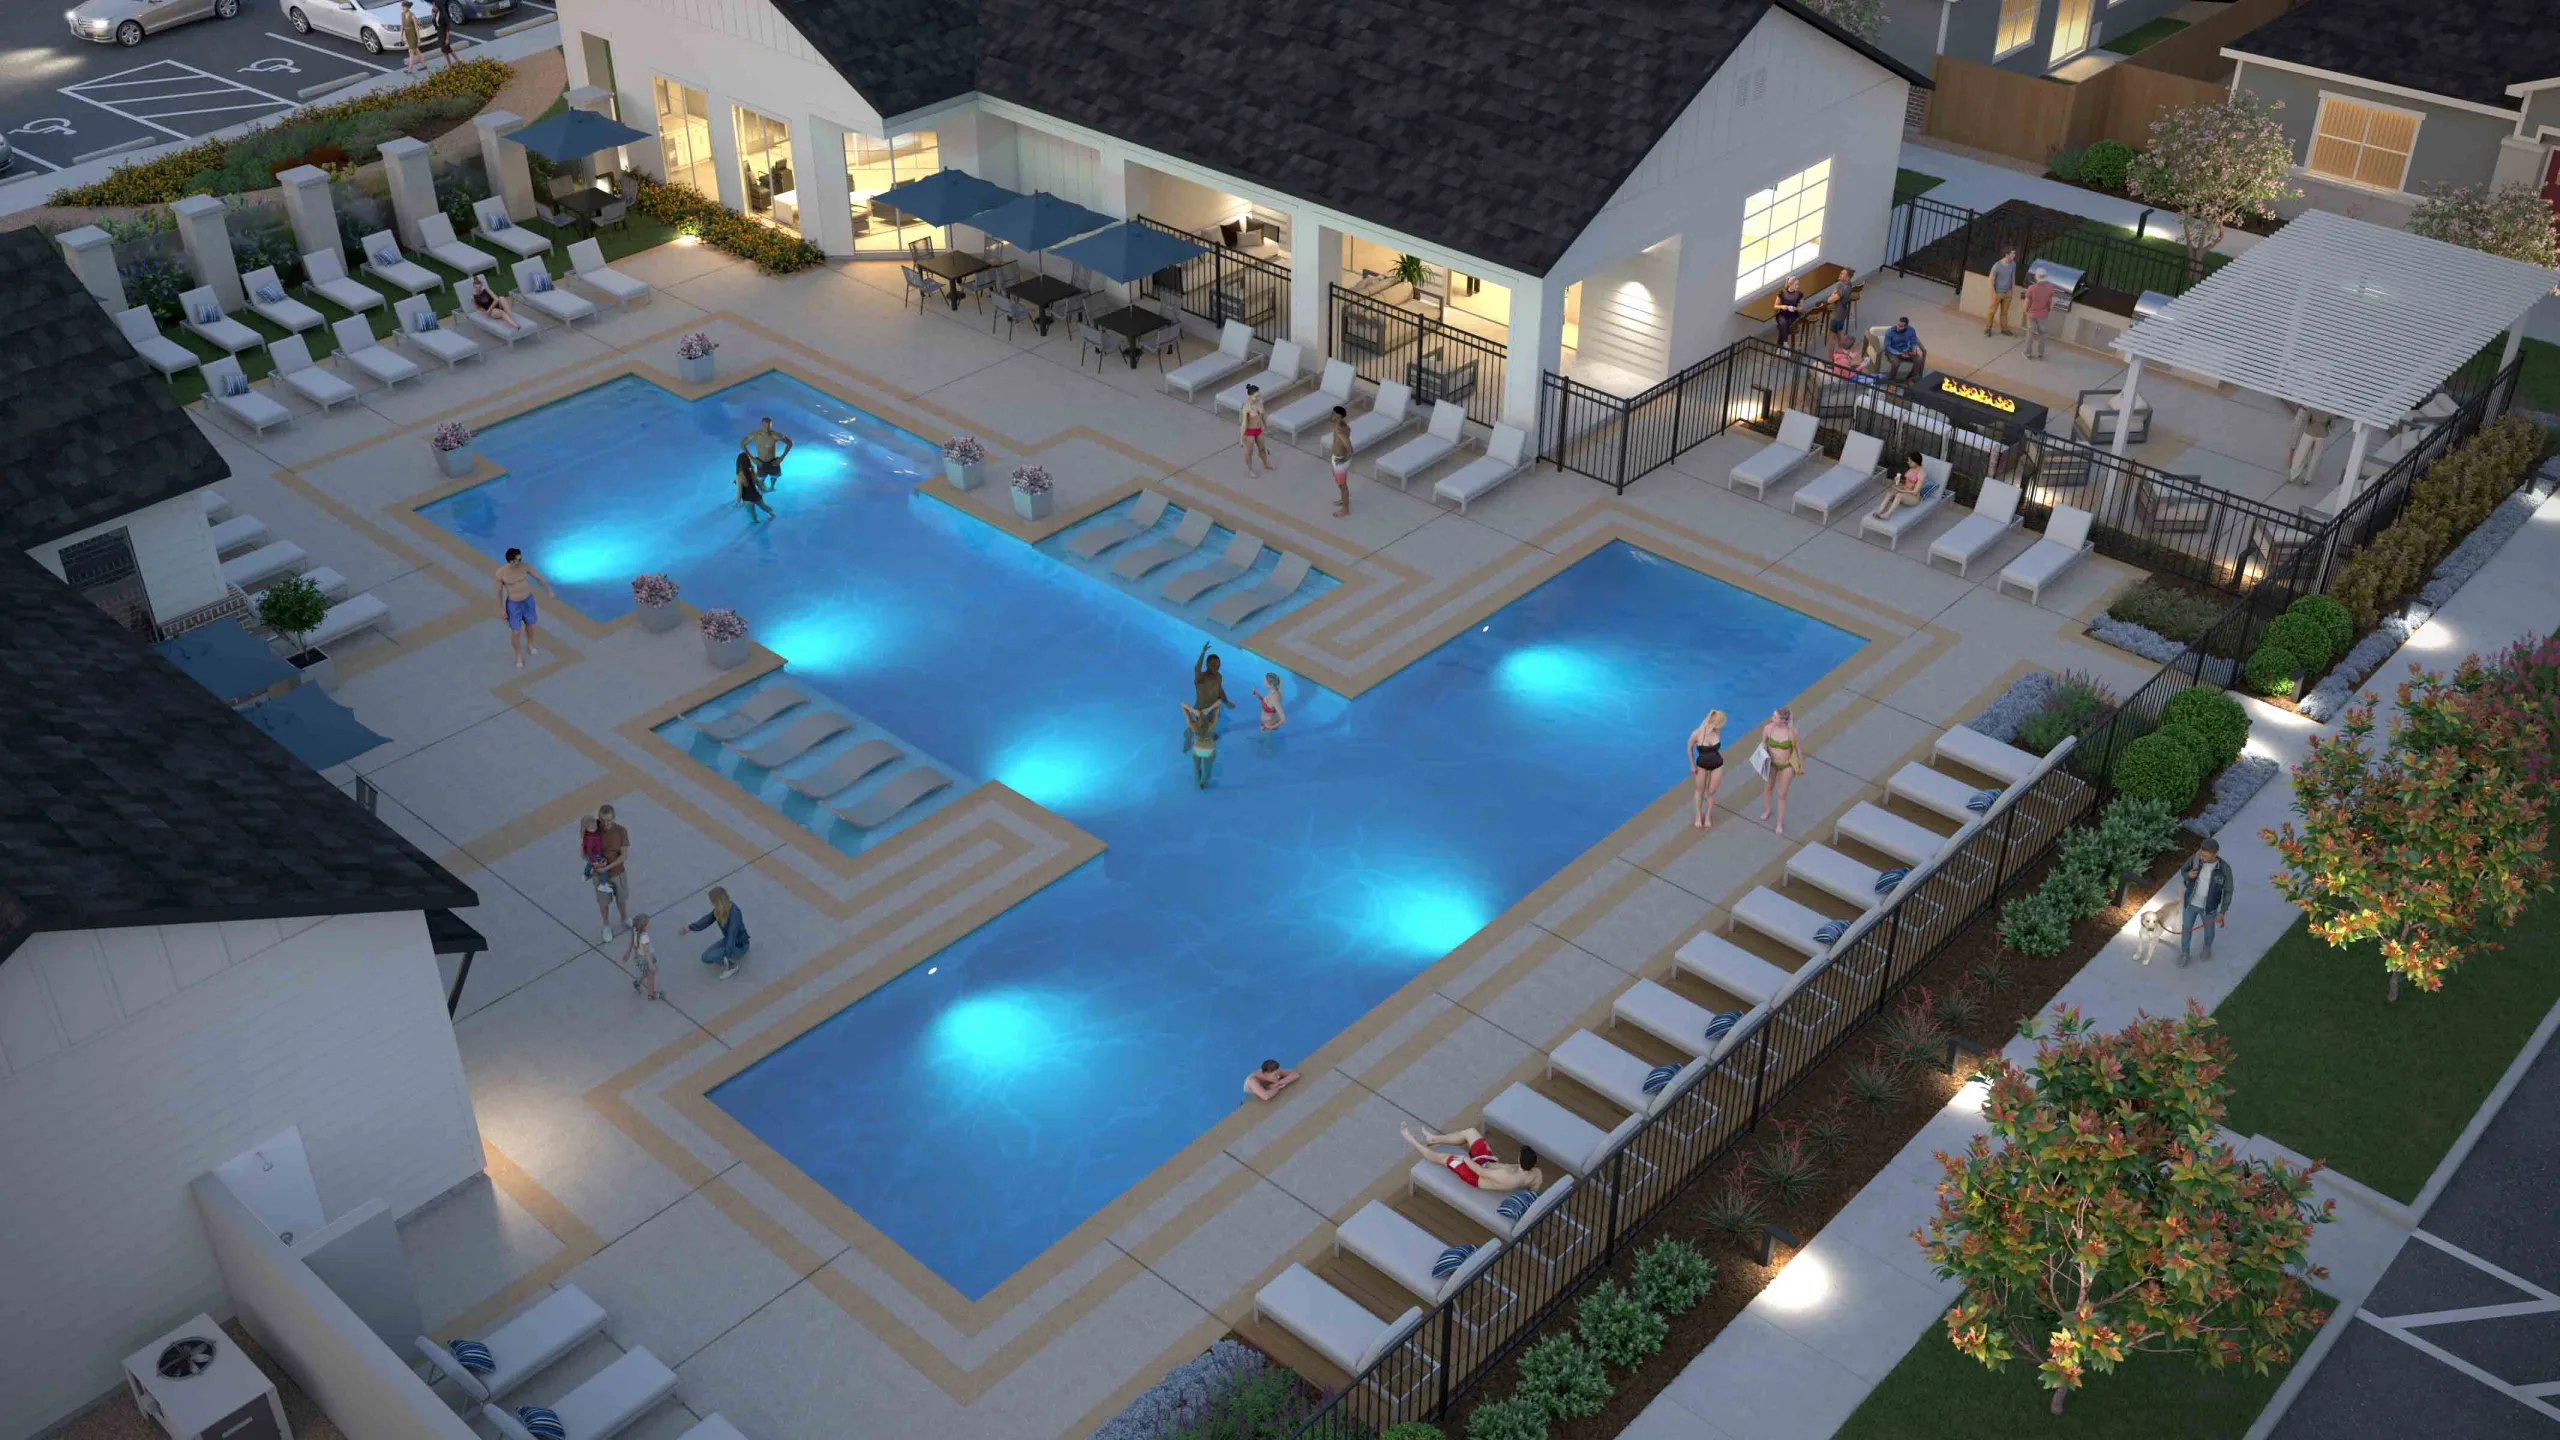 Twilight arial amenity rendering of pool, clubhouse, and fitness center at Yardly Cypress. Leasing office is also in rendering where guests can meet staff and tour new rental homes with private fenced backyards.